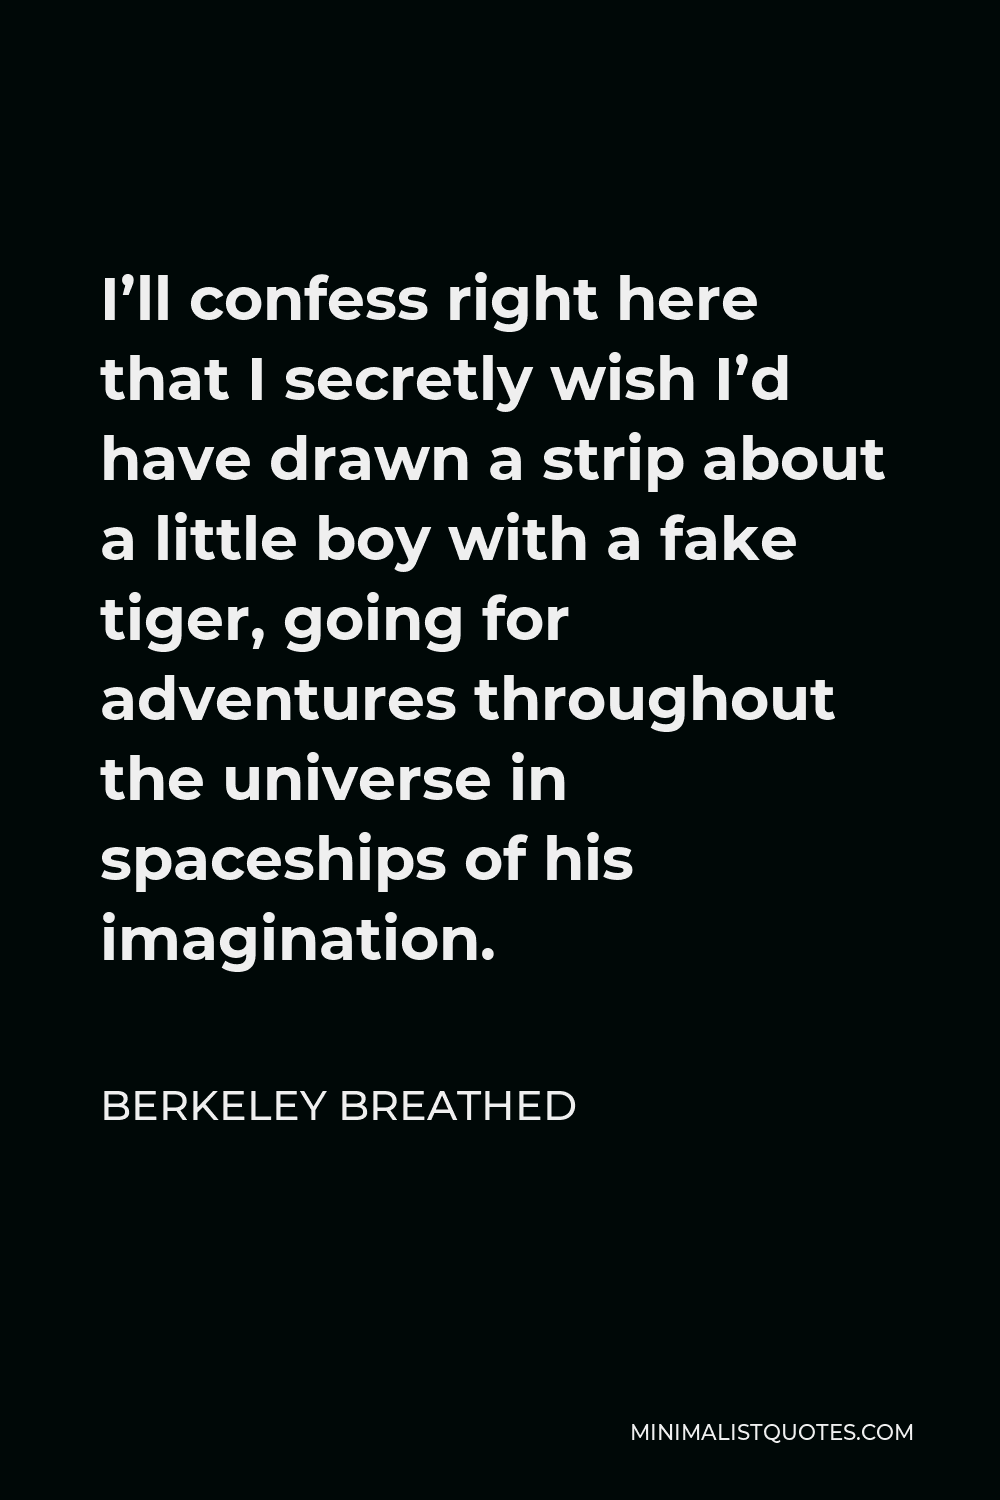 Berkeley Breathed Quote - I’ll confess right here that I secretly wish I’d have drawn a strip about a little boy with a fake tiger, going for adventures throughout the universe in spaceships of his imagination.